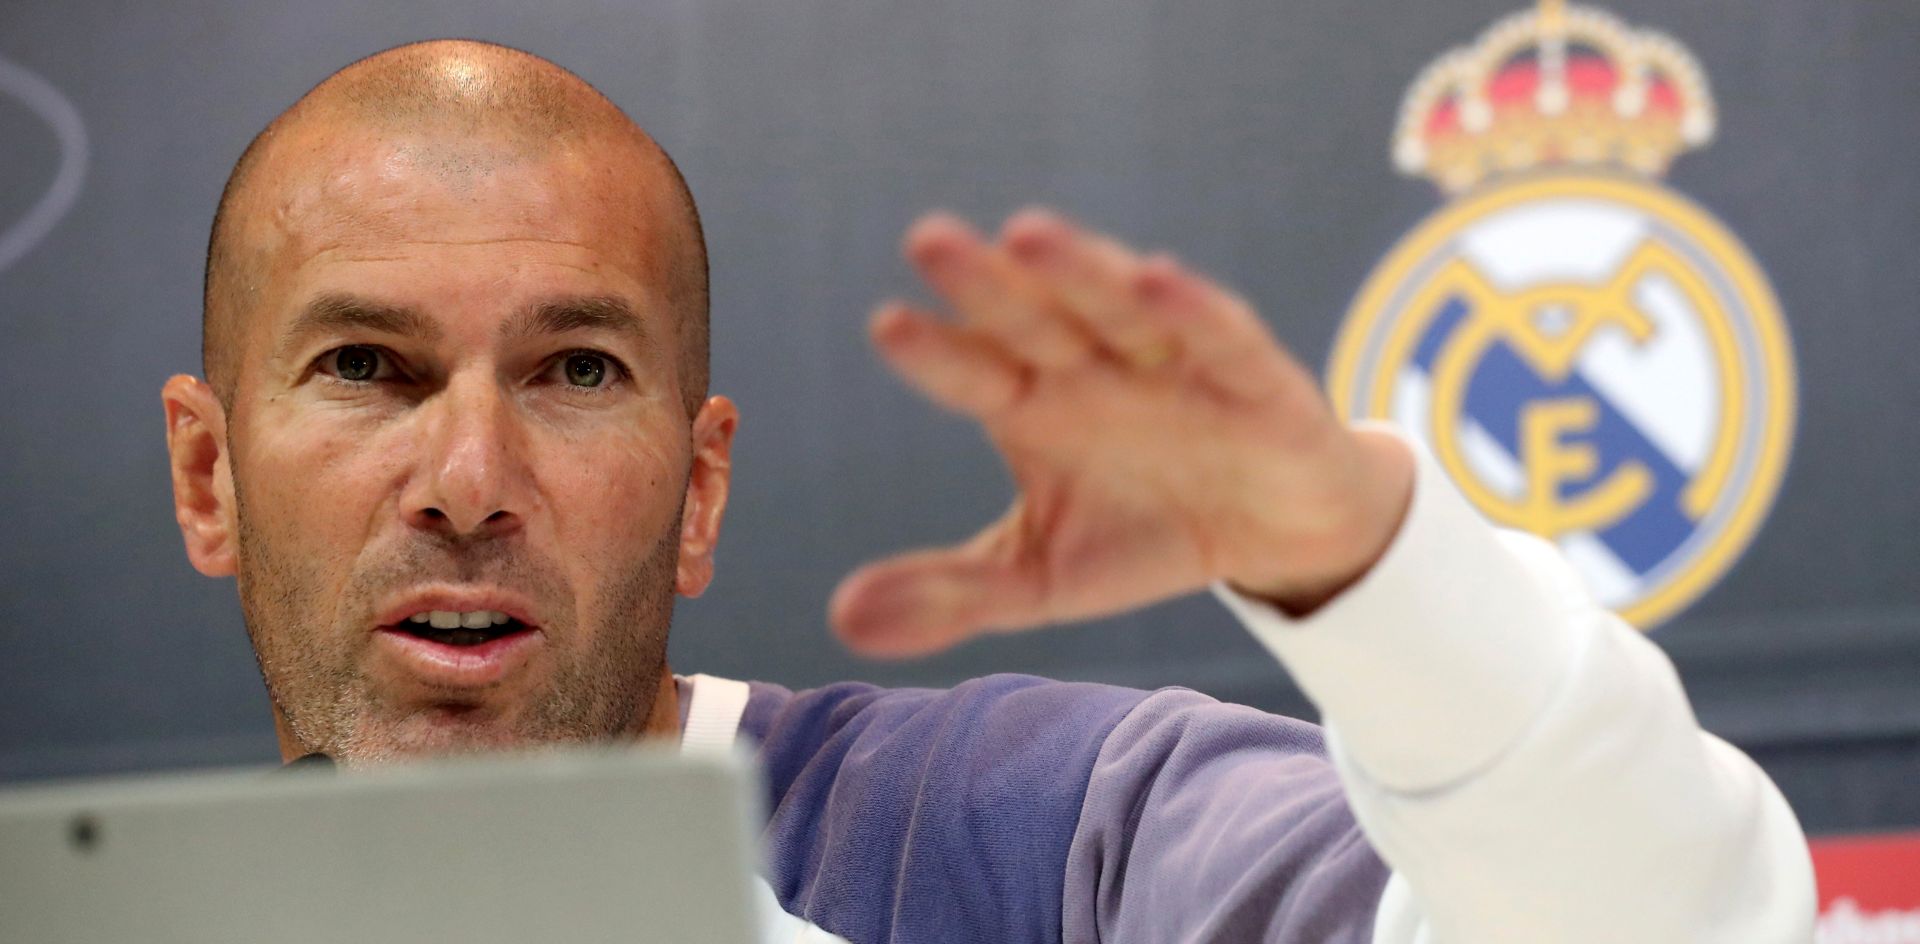 epa05926764 Real Madrid's head coach, French Zinedine Zidane, speaks during a press conference following training session at the team's sports facilities in Valdebebas, Madrid, Spain, on 25 April 2017. Real Madrid will face Deportivo in a Spanish Primera Division League soccer match on 26 April.  EPA/Zipi